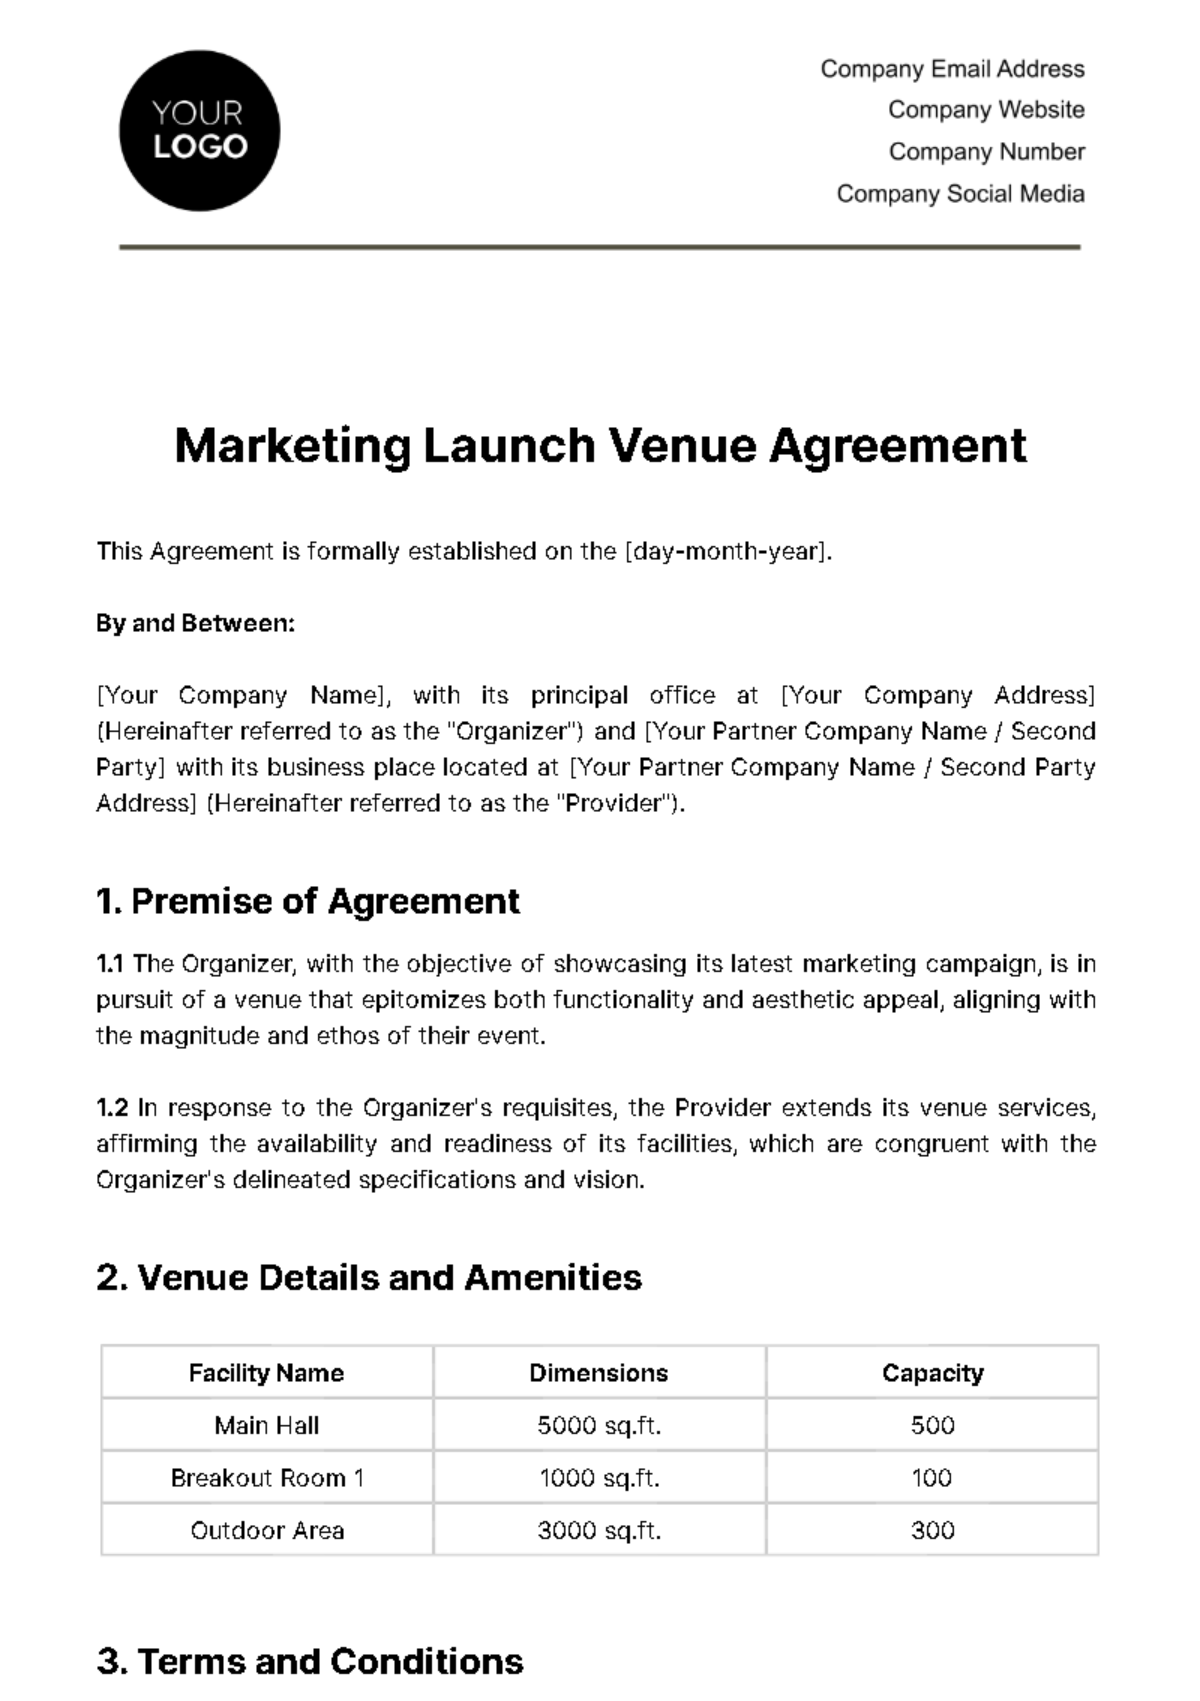 Free Marketing Launch Venue Agreement Template